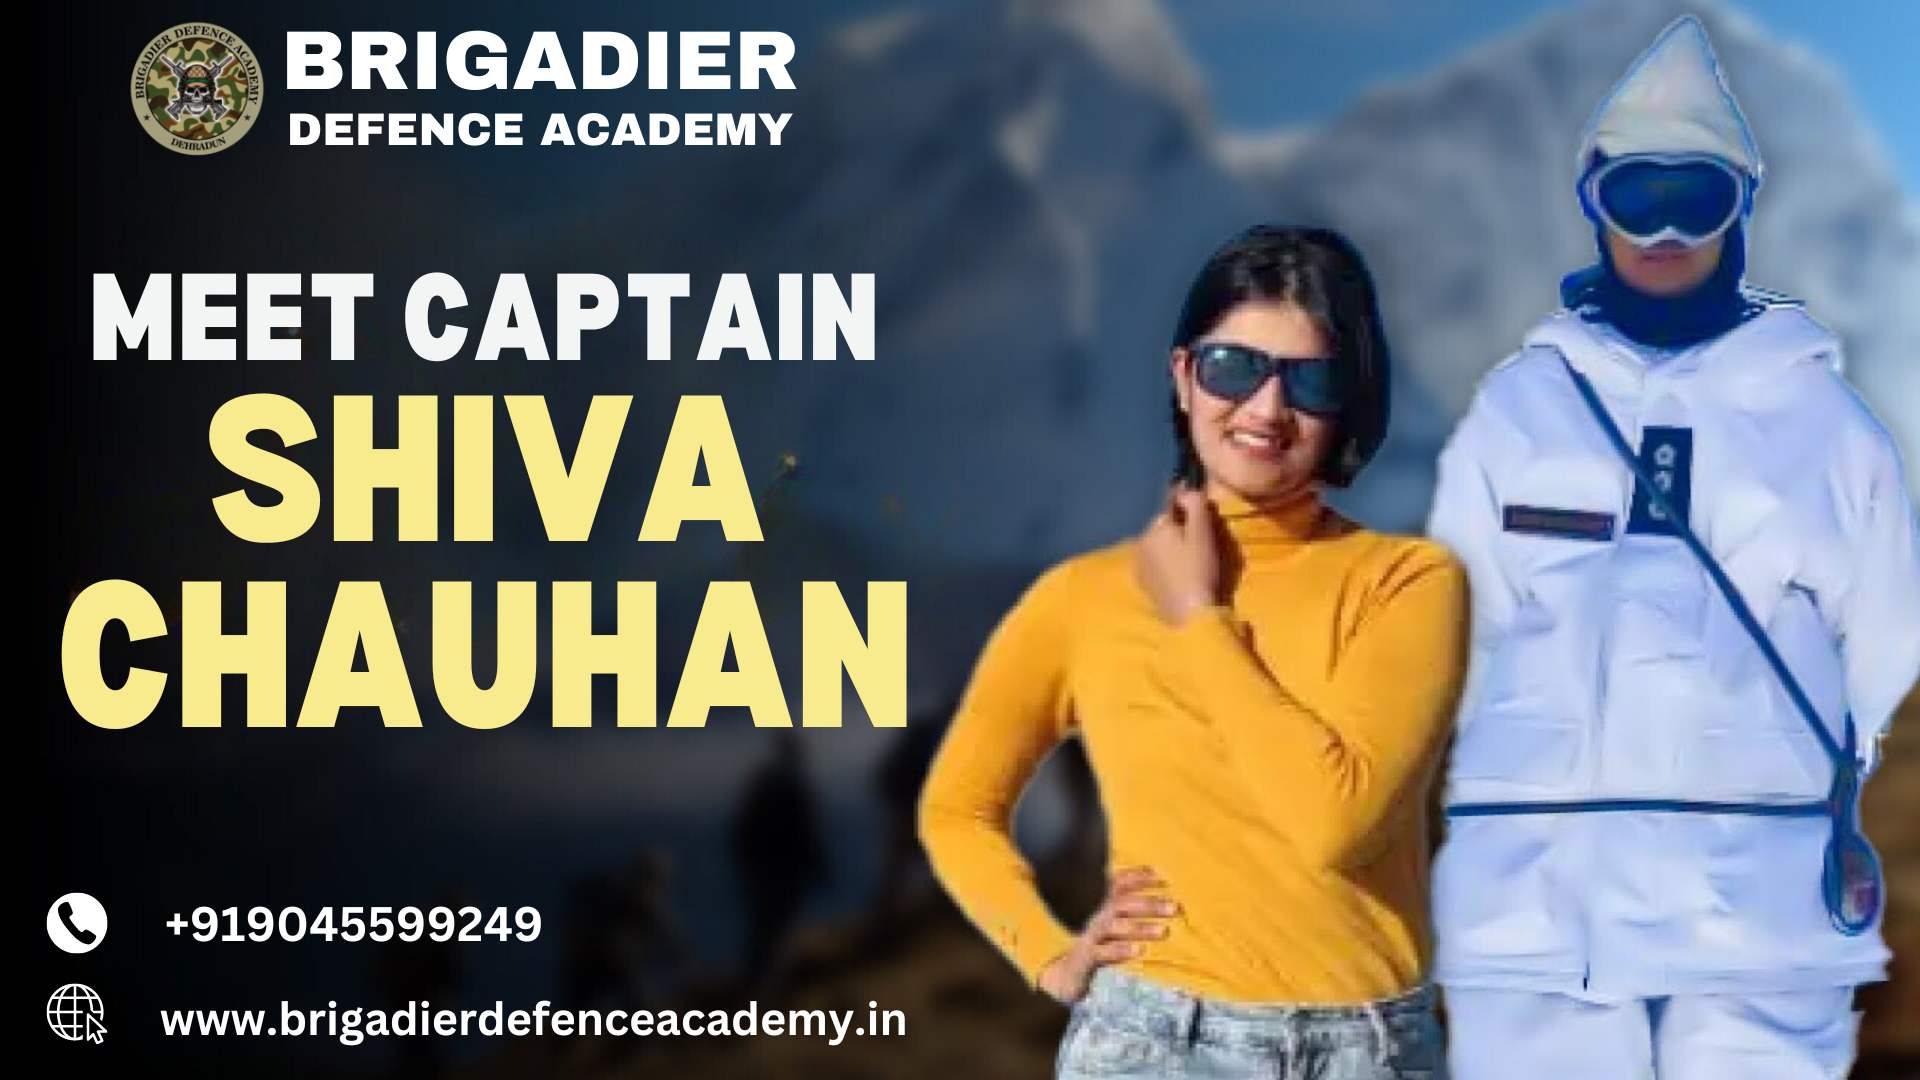 Meet Capt Shiva Chauhan, The first woman to get deployed in Siachen